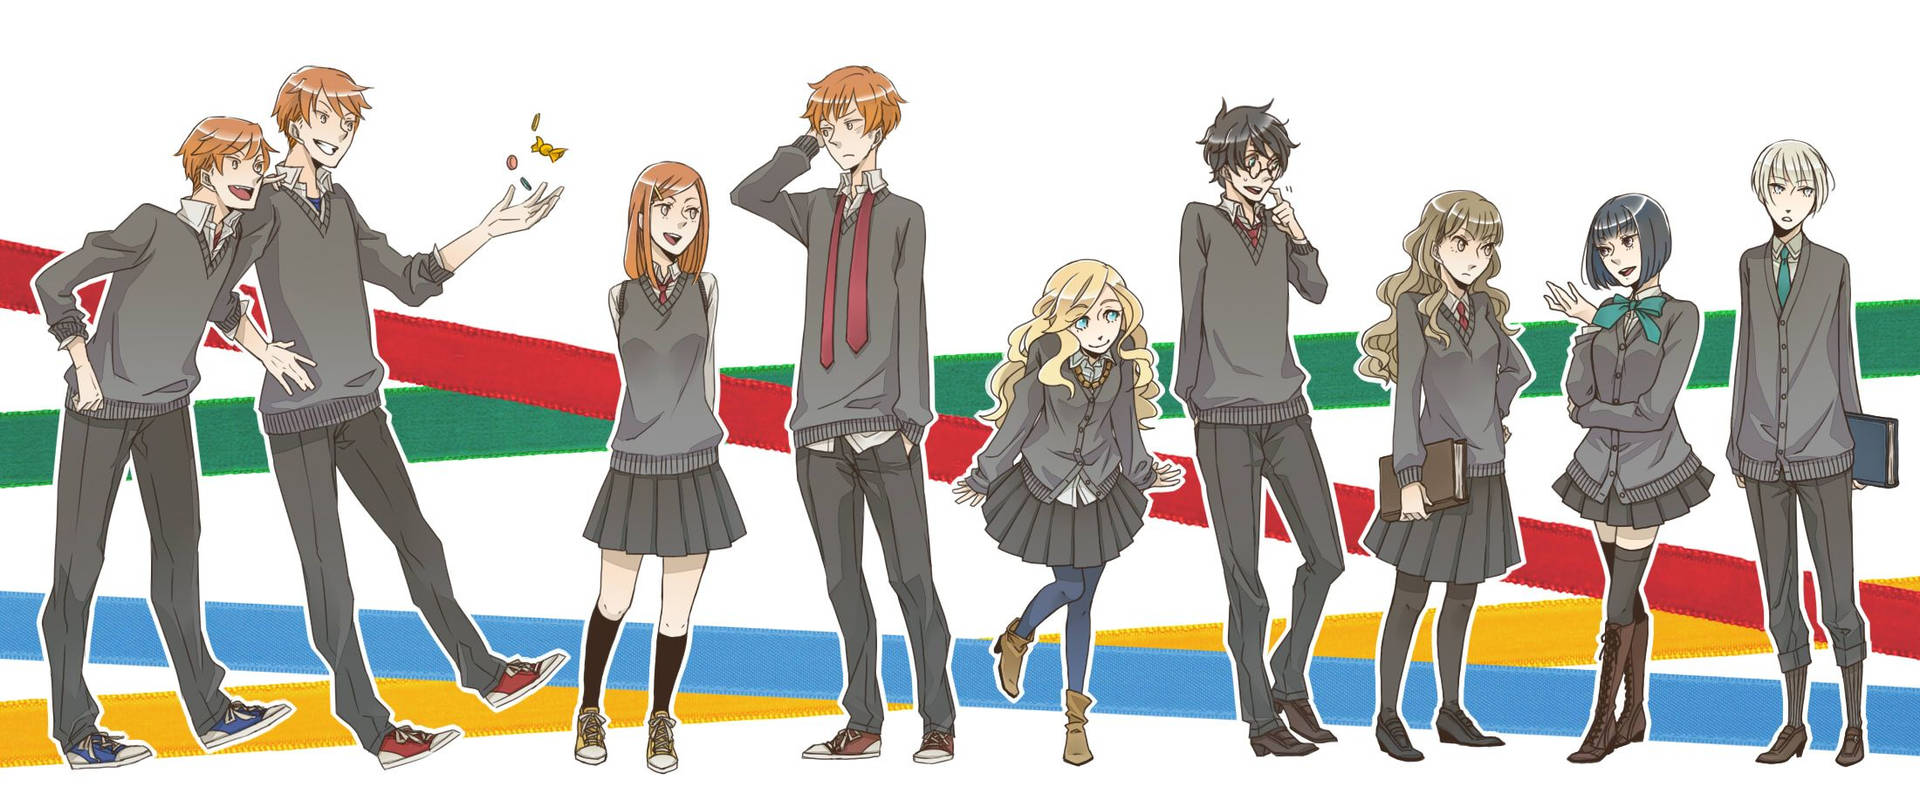 Download Harry Potter Anime House Colors Wallpaper 